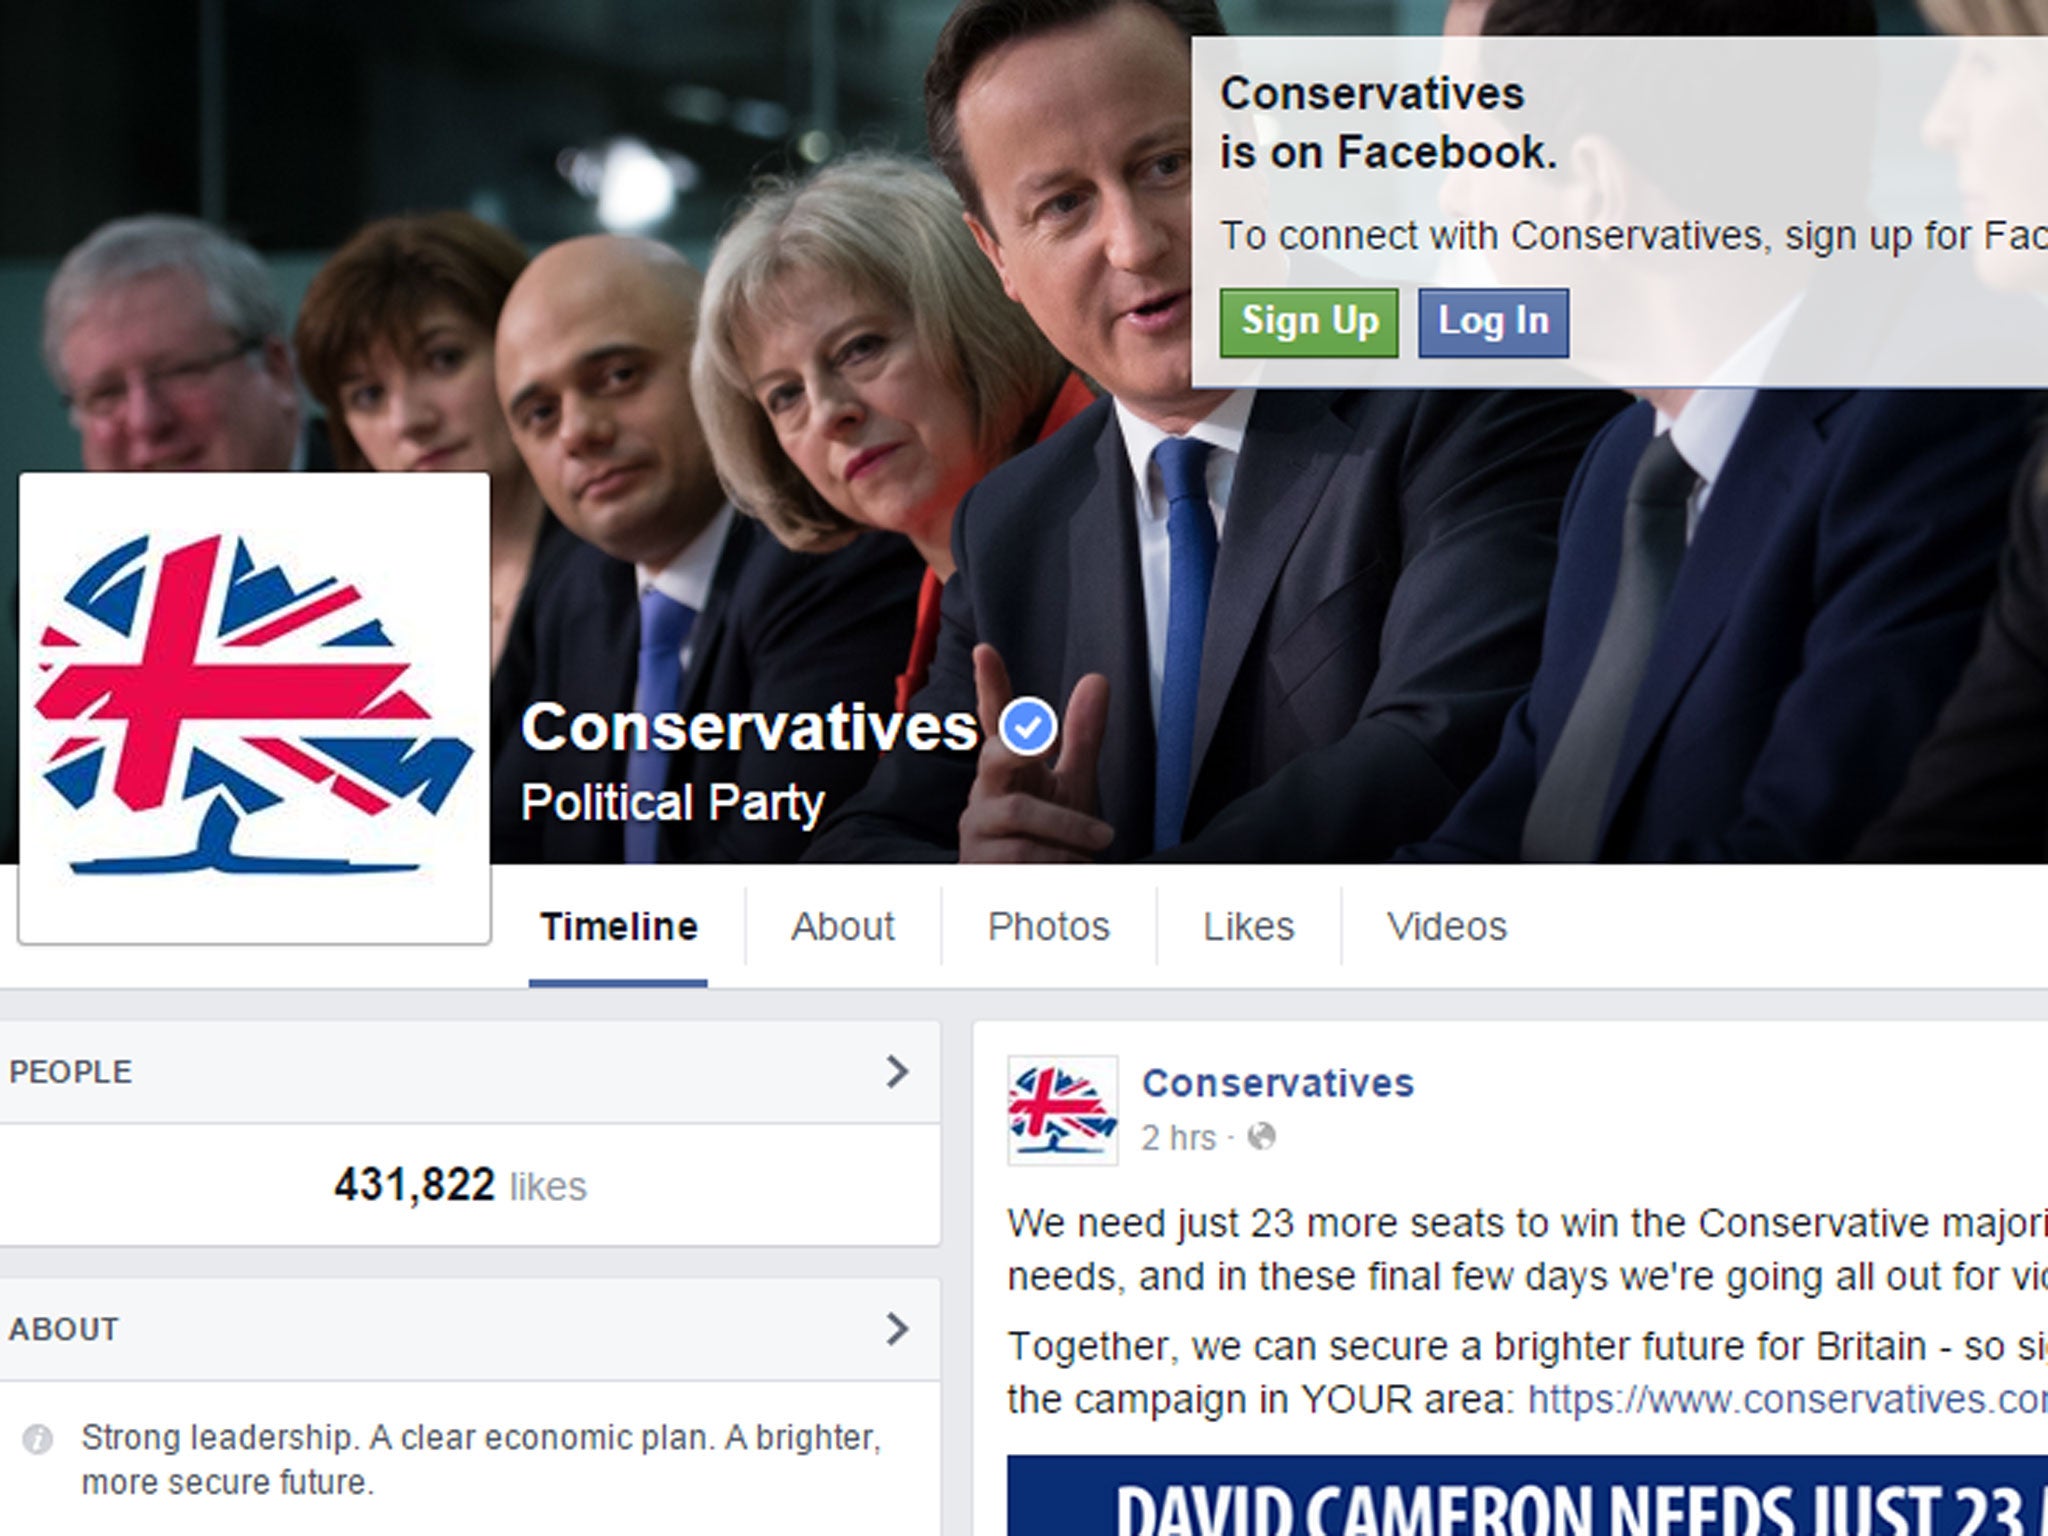 The Conservatives have over 430,000 Facebook likes